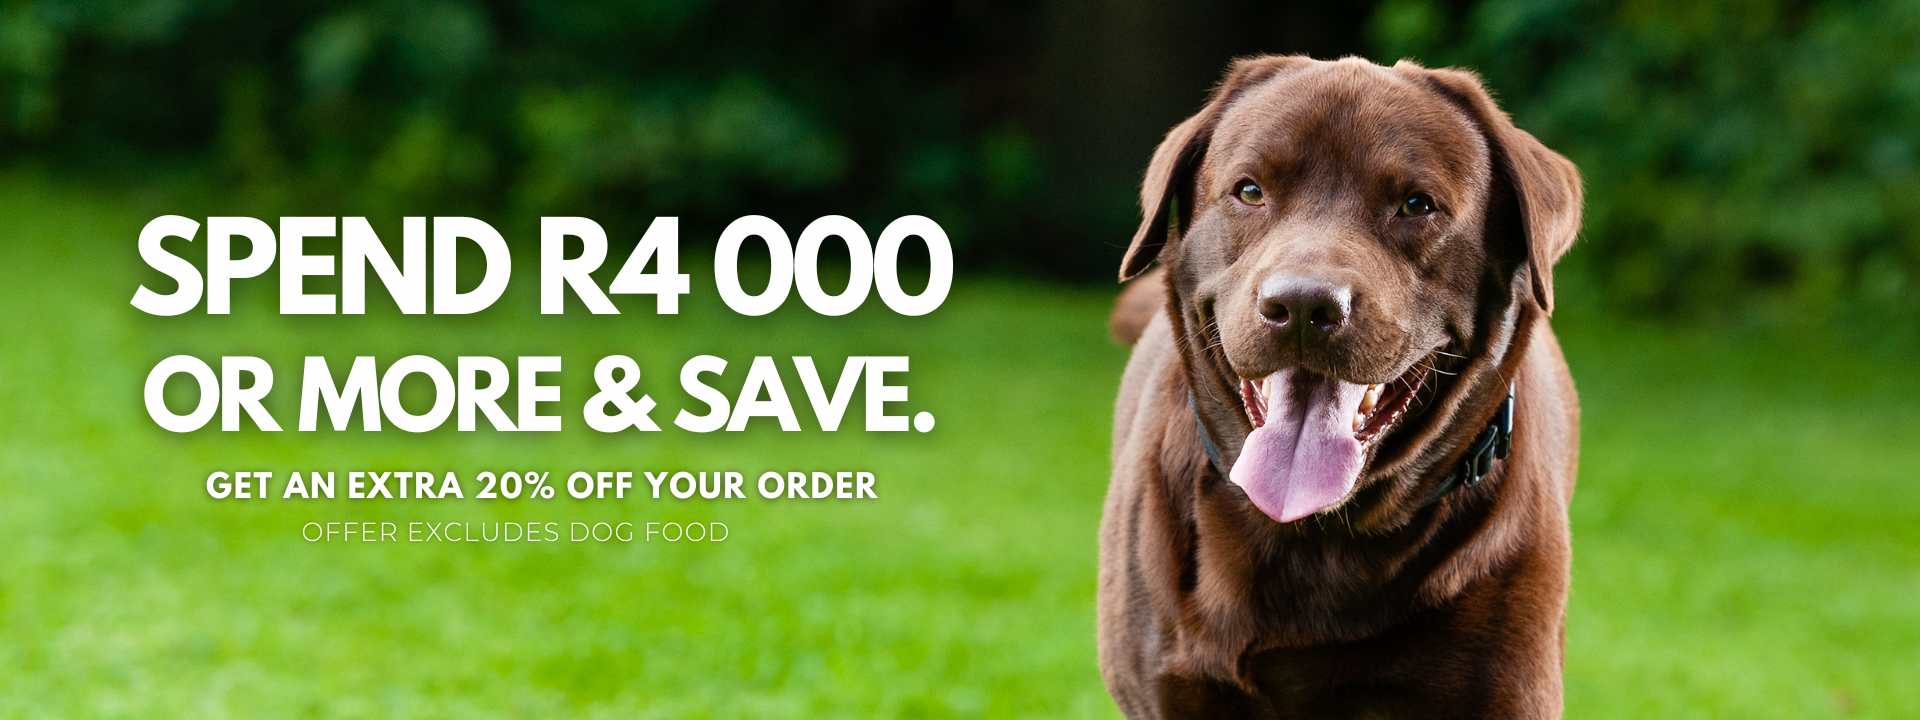 Spend R4,000+ Excl. pet fopod banner pet image - South Africa’s No.1 ePet Store for premium pet products, online pet shopping, best pet store near me, dog beds, dog bed, plush dog bed, washable dog bed, fluffy dog bed, calming dog bed, takealot dog bed, iremia dog, dog food, pet food, cat food, dog collar, dog leash, dog harness, dog harnesses, dog collars, dog leashes, dog bowls, pet bowls, slow feeders, slow feeding dog bowls, slow feeder dog bowls, Complete Pet Nutrition